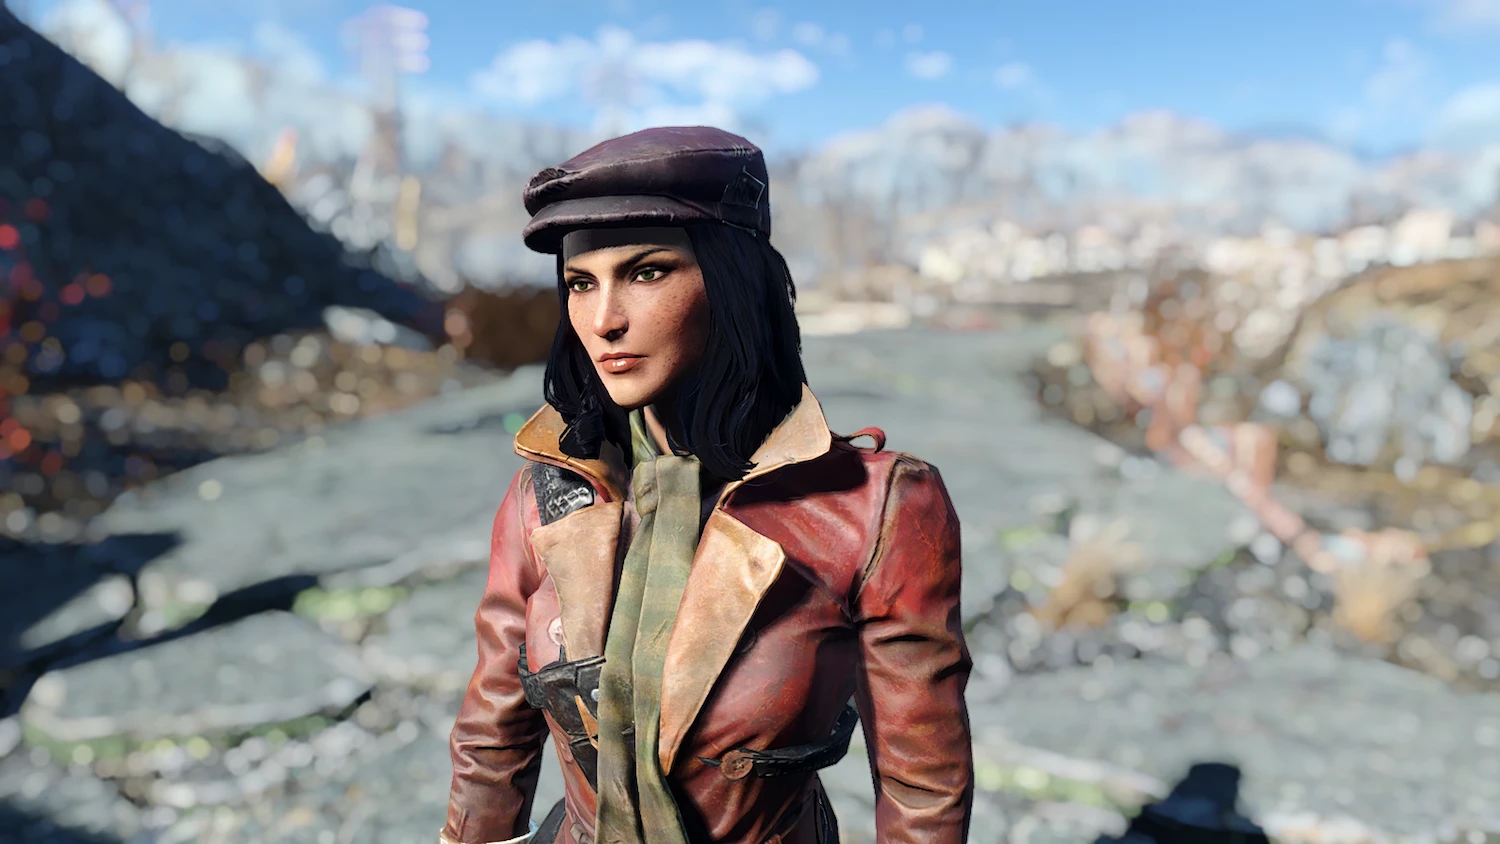 Blue S Piper At Fallout 4 Nexus Mods And Community